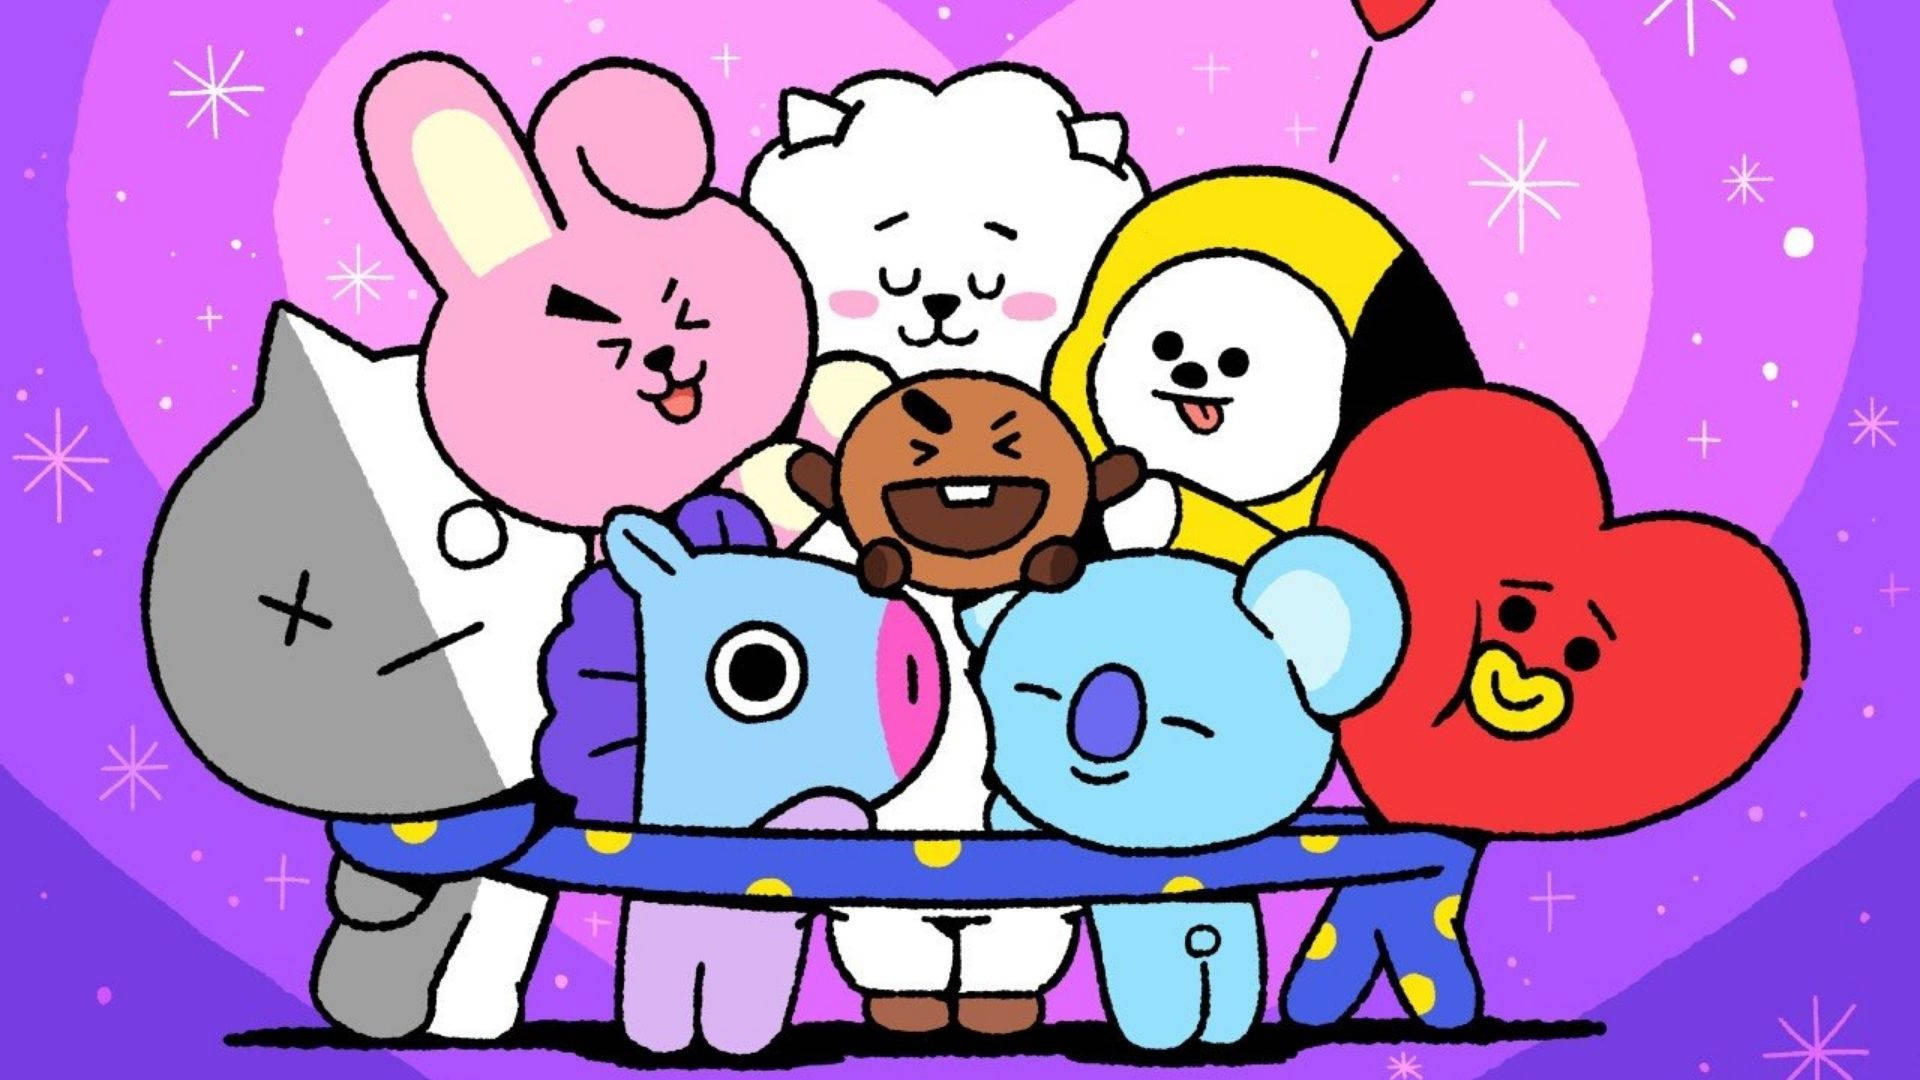 Bt21 Hugging Each Other Sweetly Wallpaper